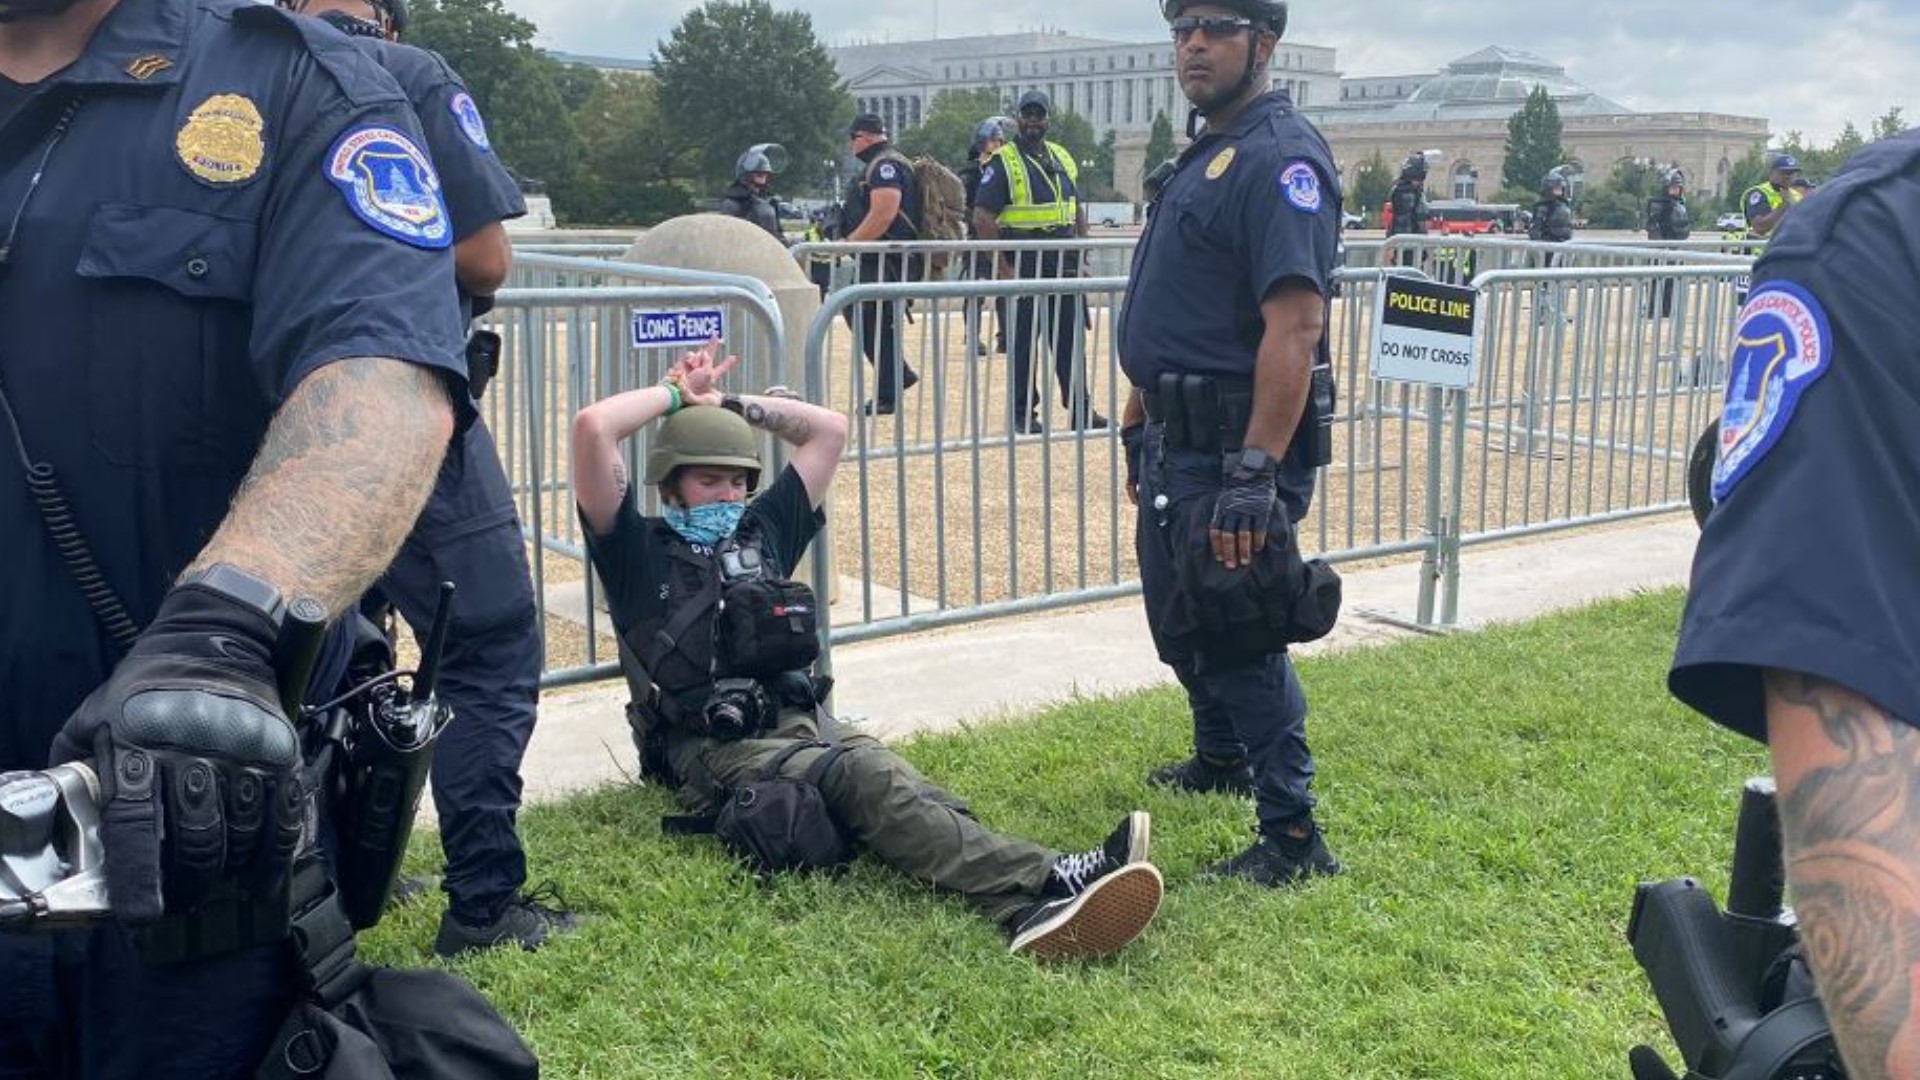 At approximately 12:40 pm, U.S. Capitol Police officers arrested a man they say had a knife, for a weapons violation according to USCP.